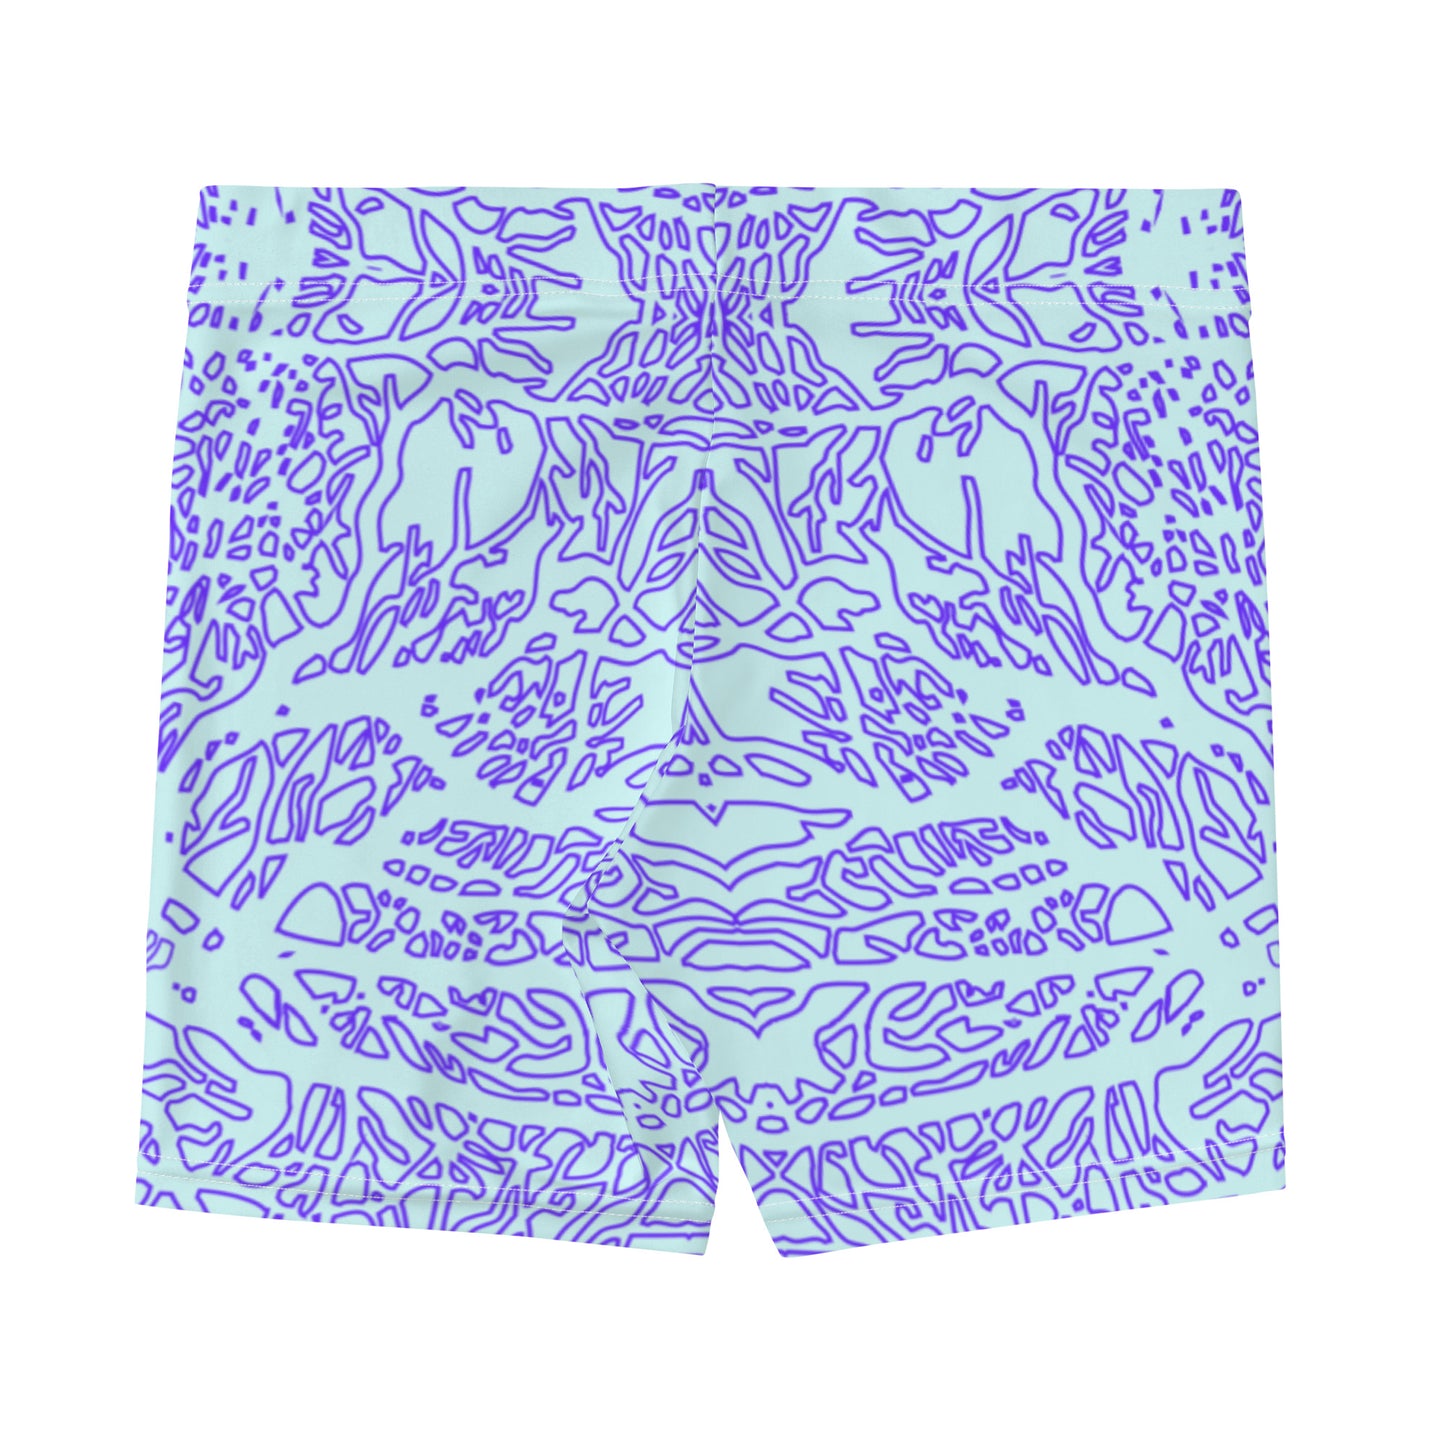 Neso Blue Coral - Performance Shorts